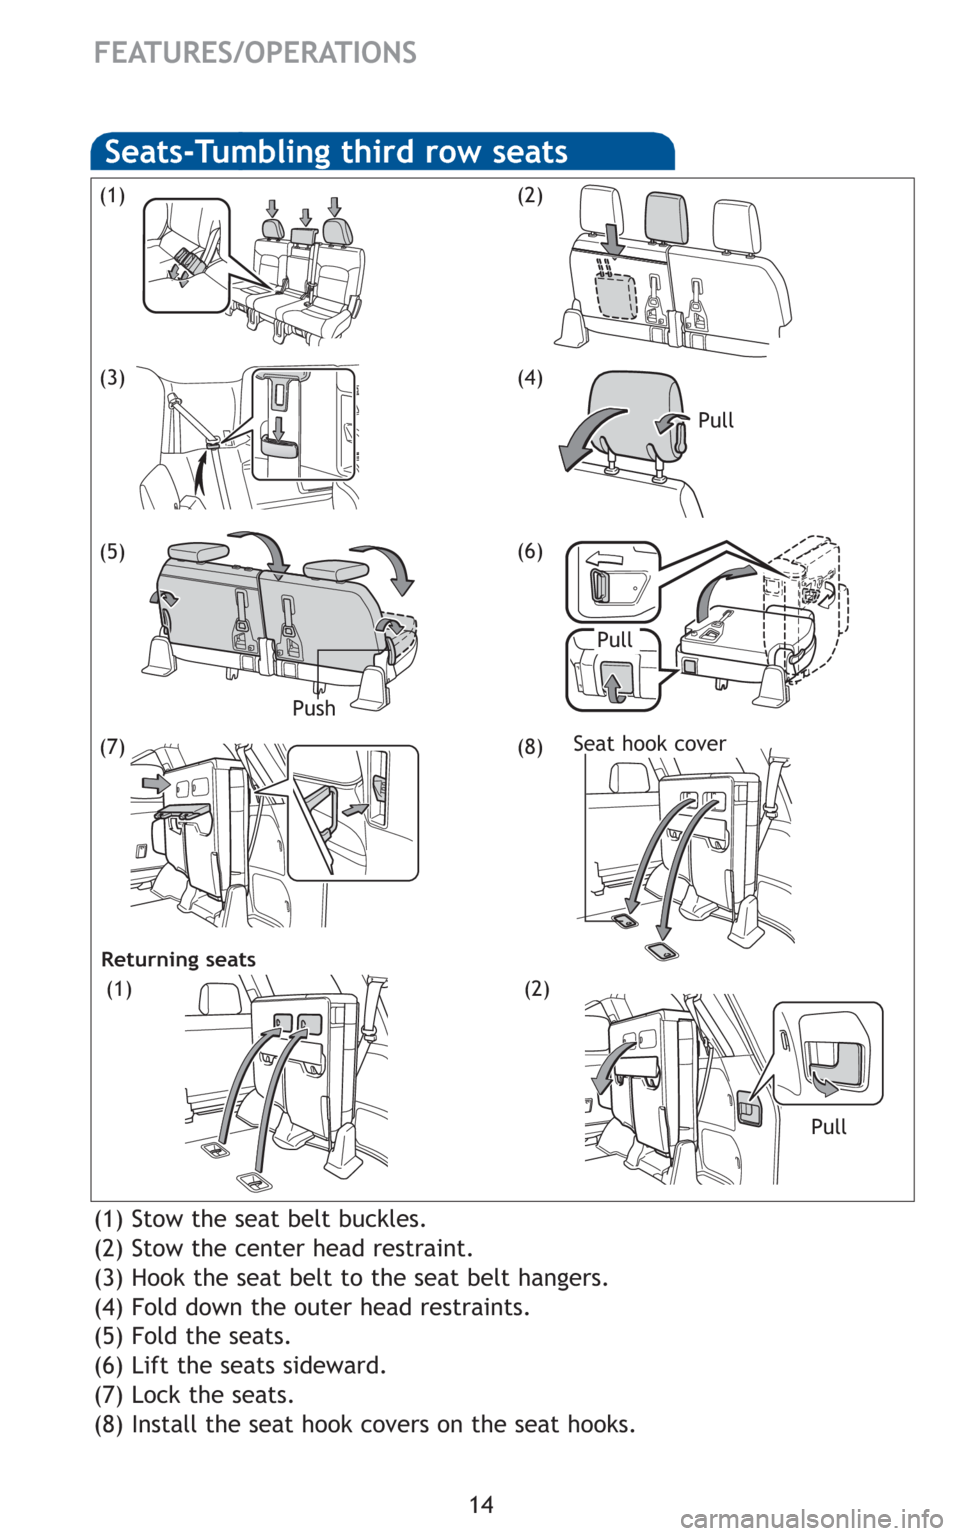 TOYOTA LAND CRUISER 2011 J200 Quick Reference Guide 14
FEATURES/OPERATIONS
(1) Stow the seat belt buckles.
(2) Stow the center head restraint.
(3) Hook the seat belt to the seat belt hangers.
(4) Fold down the outer head restraints.
(5) Fold the seats.